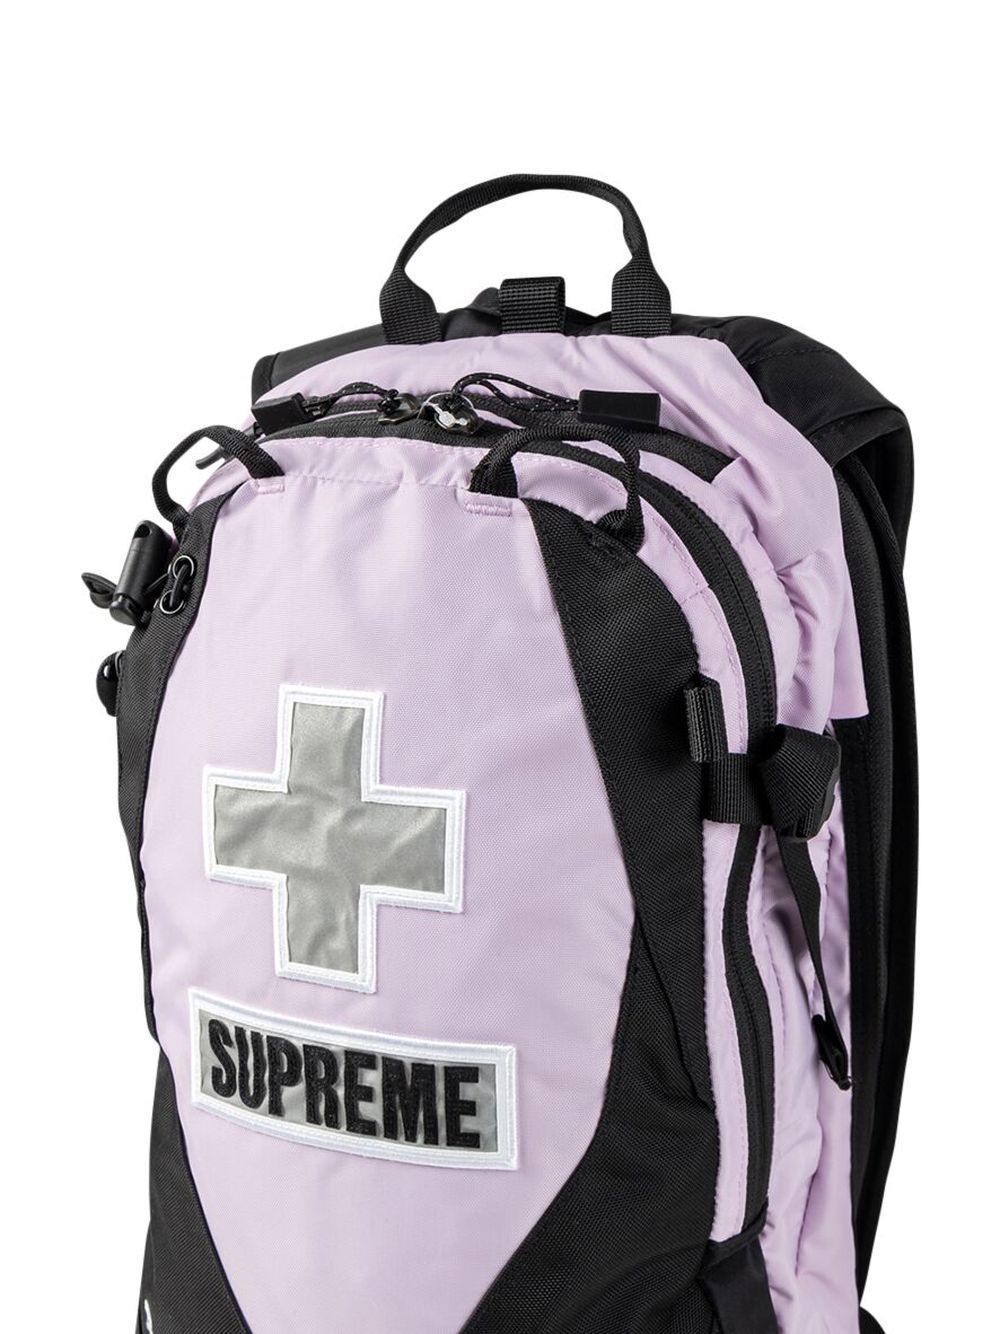 Supreme x The North Face Summit Series Rescue Chugach 16 Backpack 